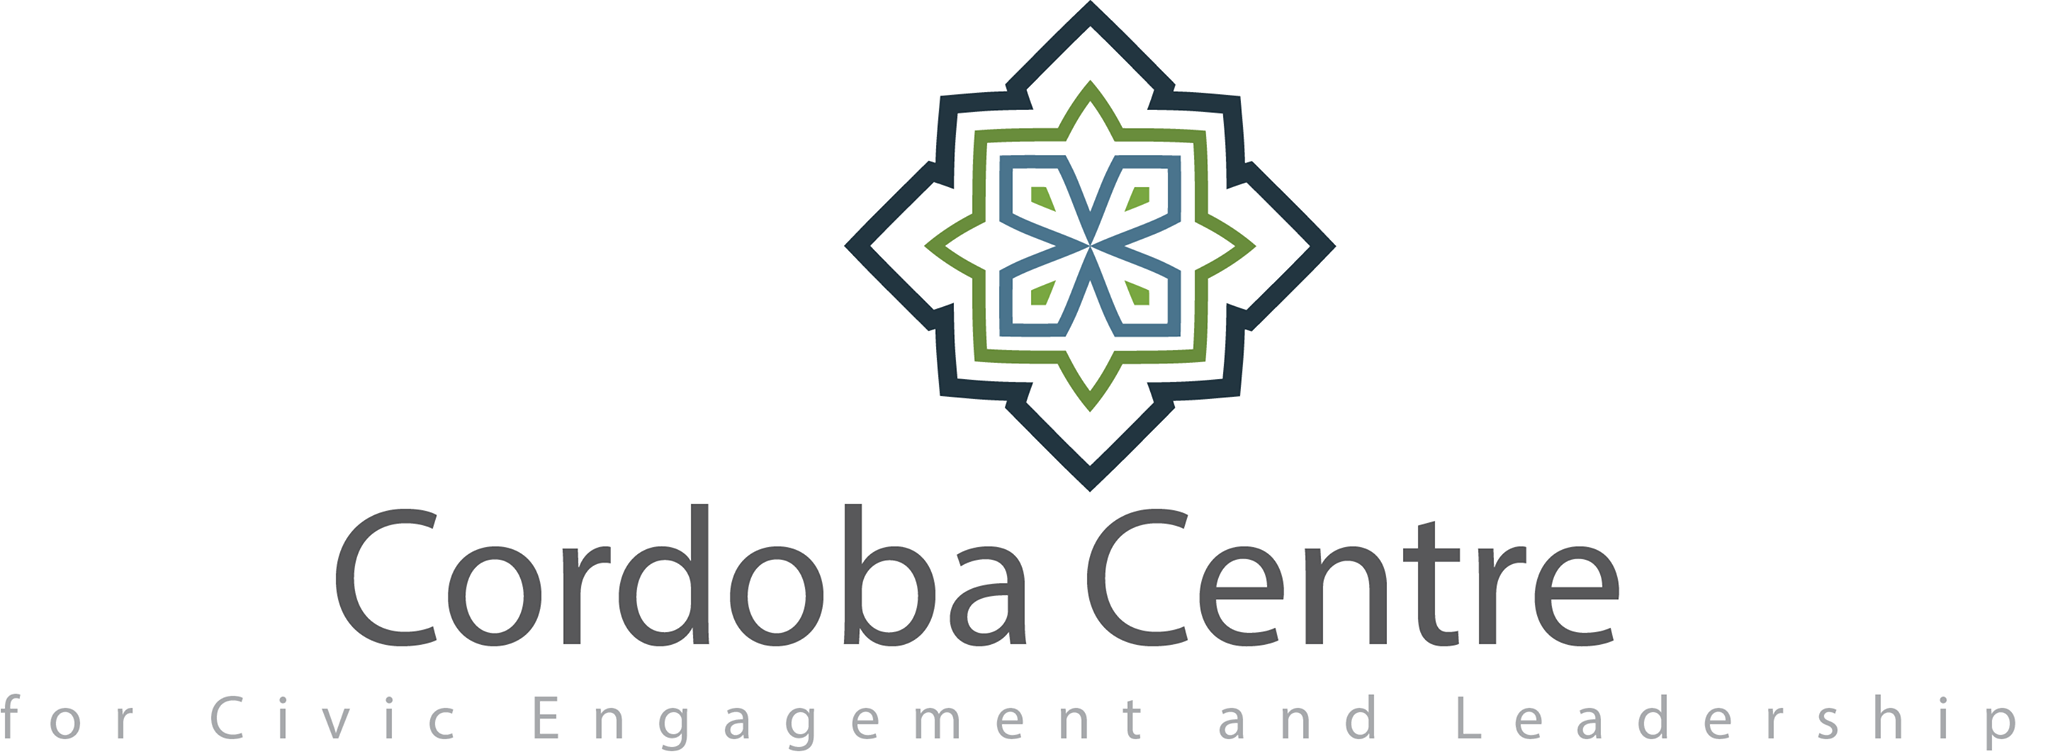 Cordoba Centre for Civic Engagement and Leadership